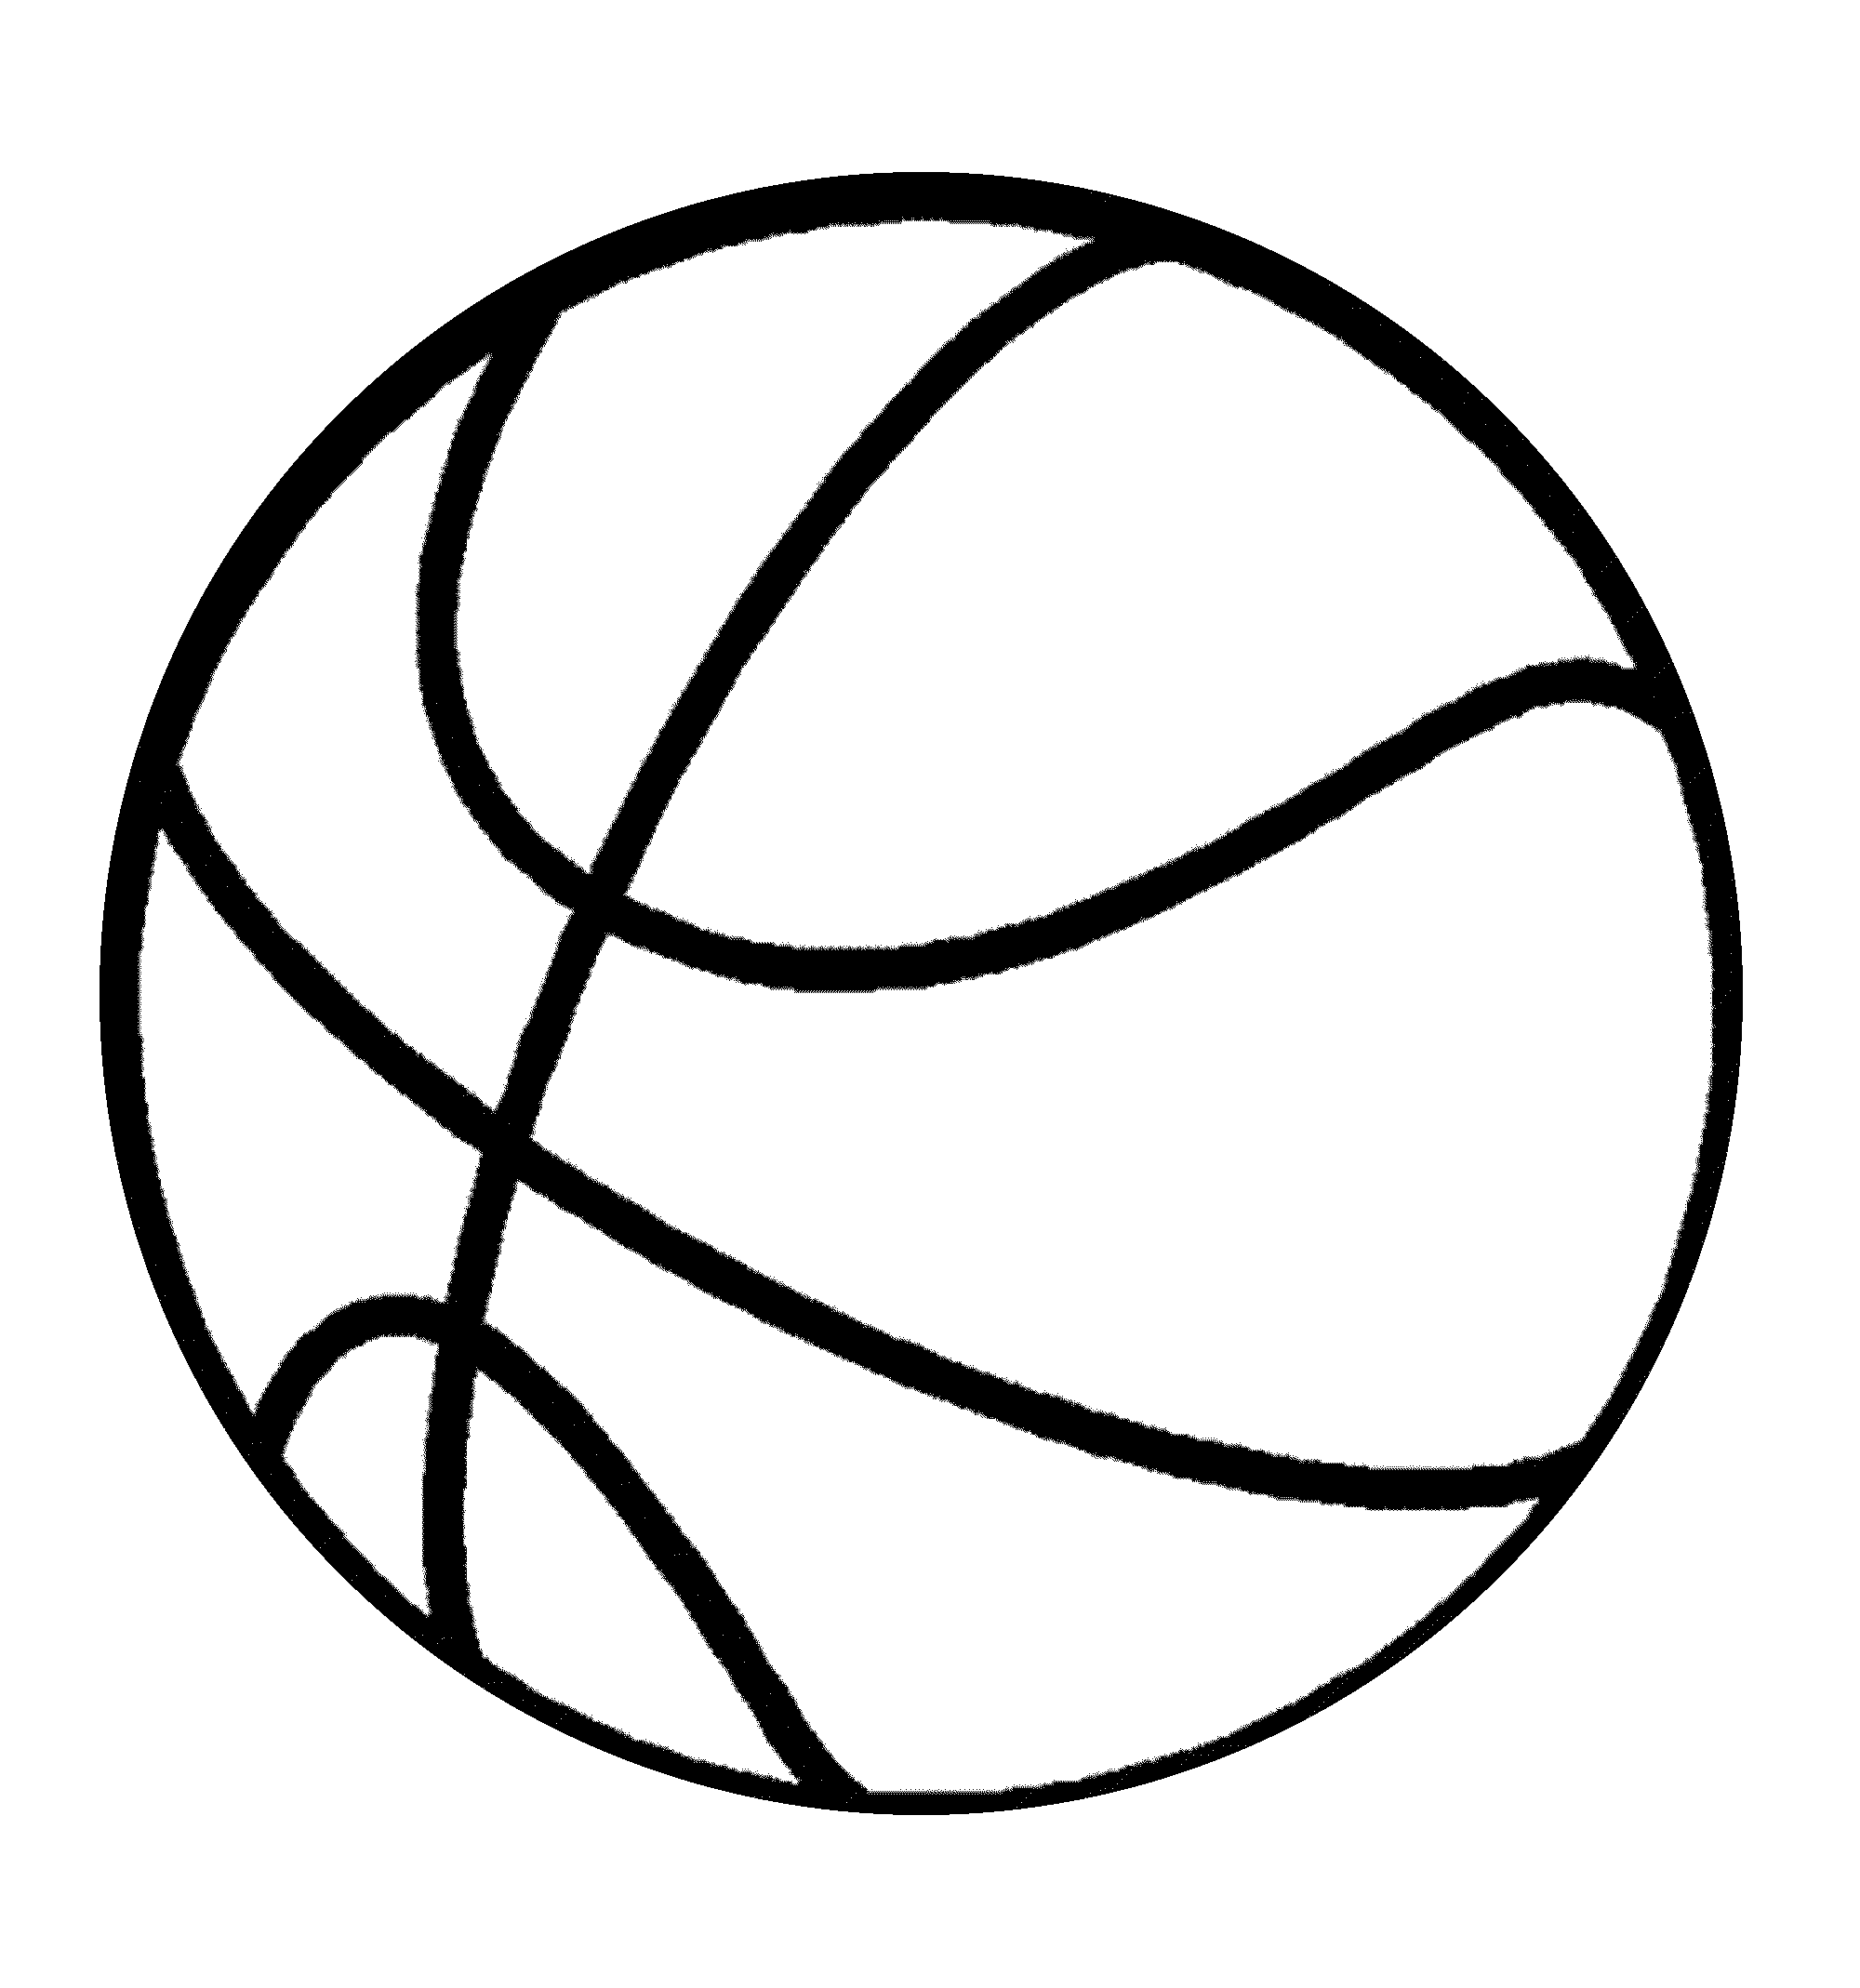 Basketball Coloring Pages For Adults - Coloring Home